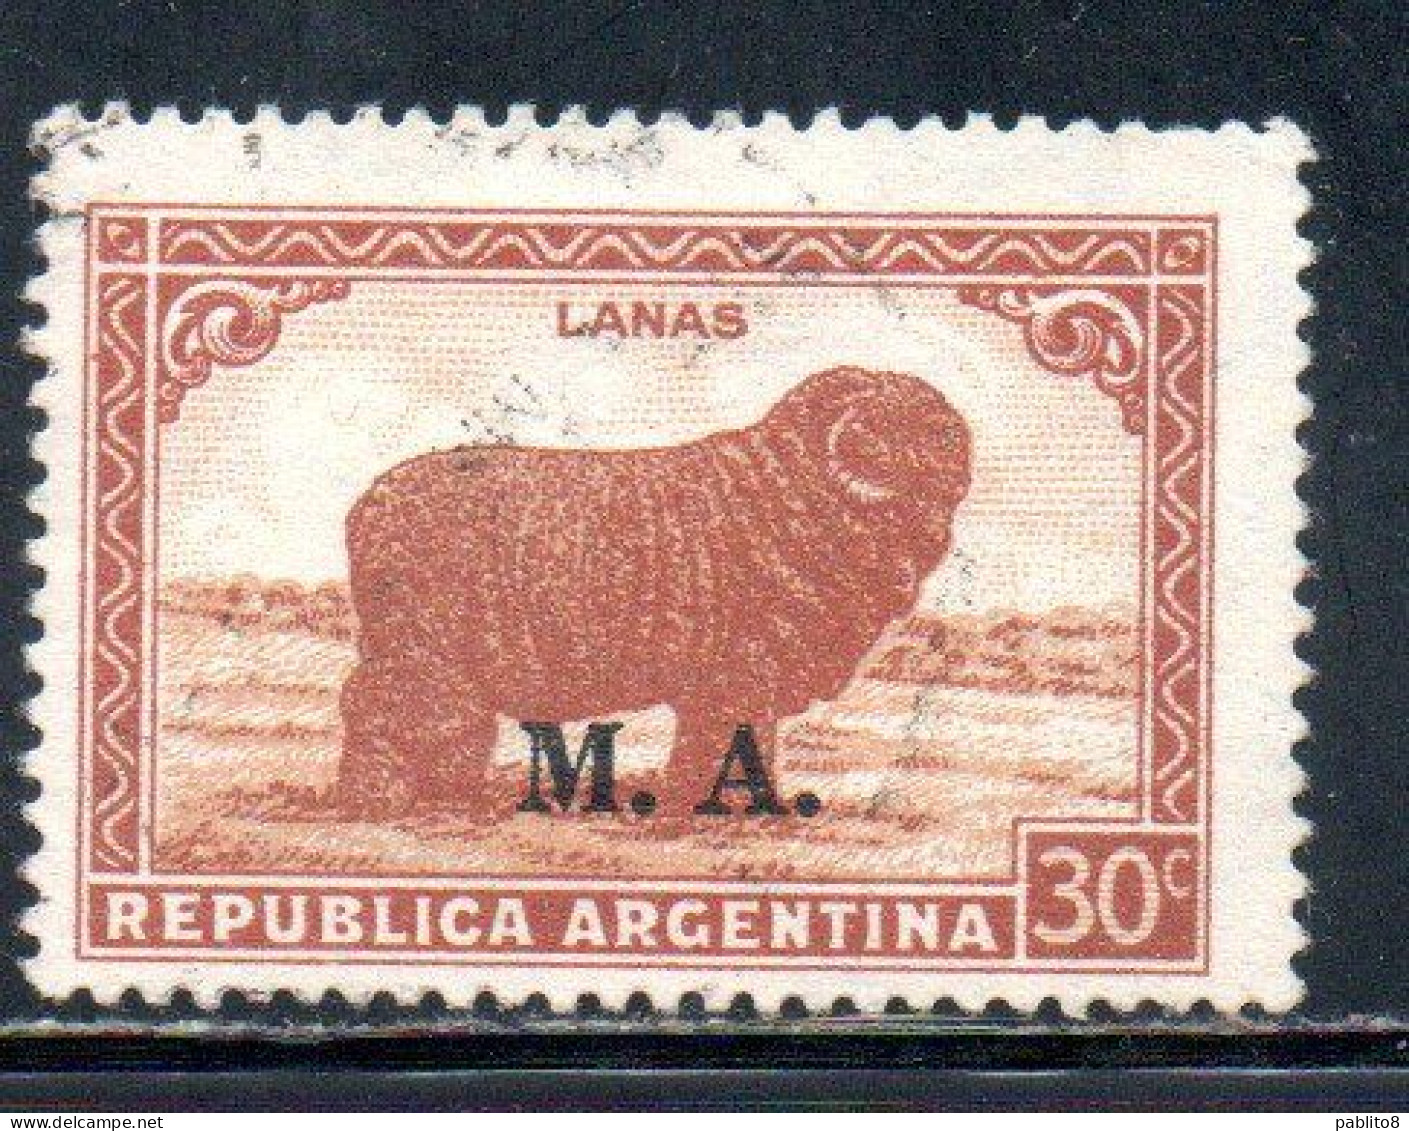 ARGENTINA 1935 1937 OFFICIAL DEPARTMENT STAMP OVERPRINTED M.A. MINISTRY OF AGRICULTURE MA 30c USED USADO - Oficiales